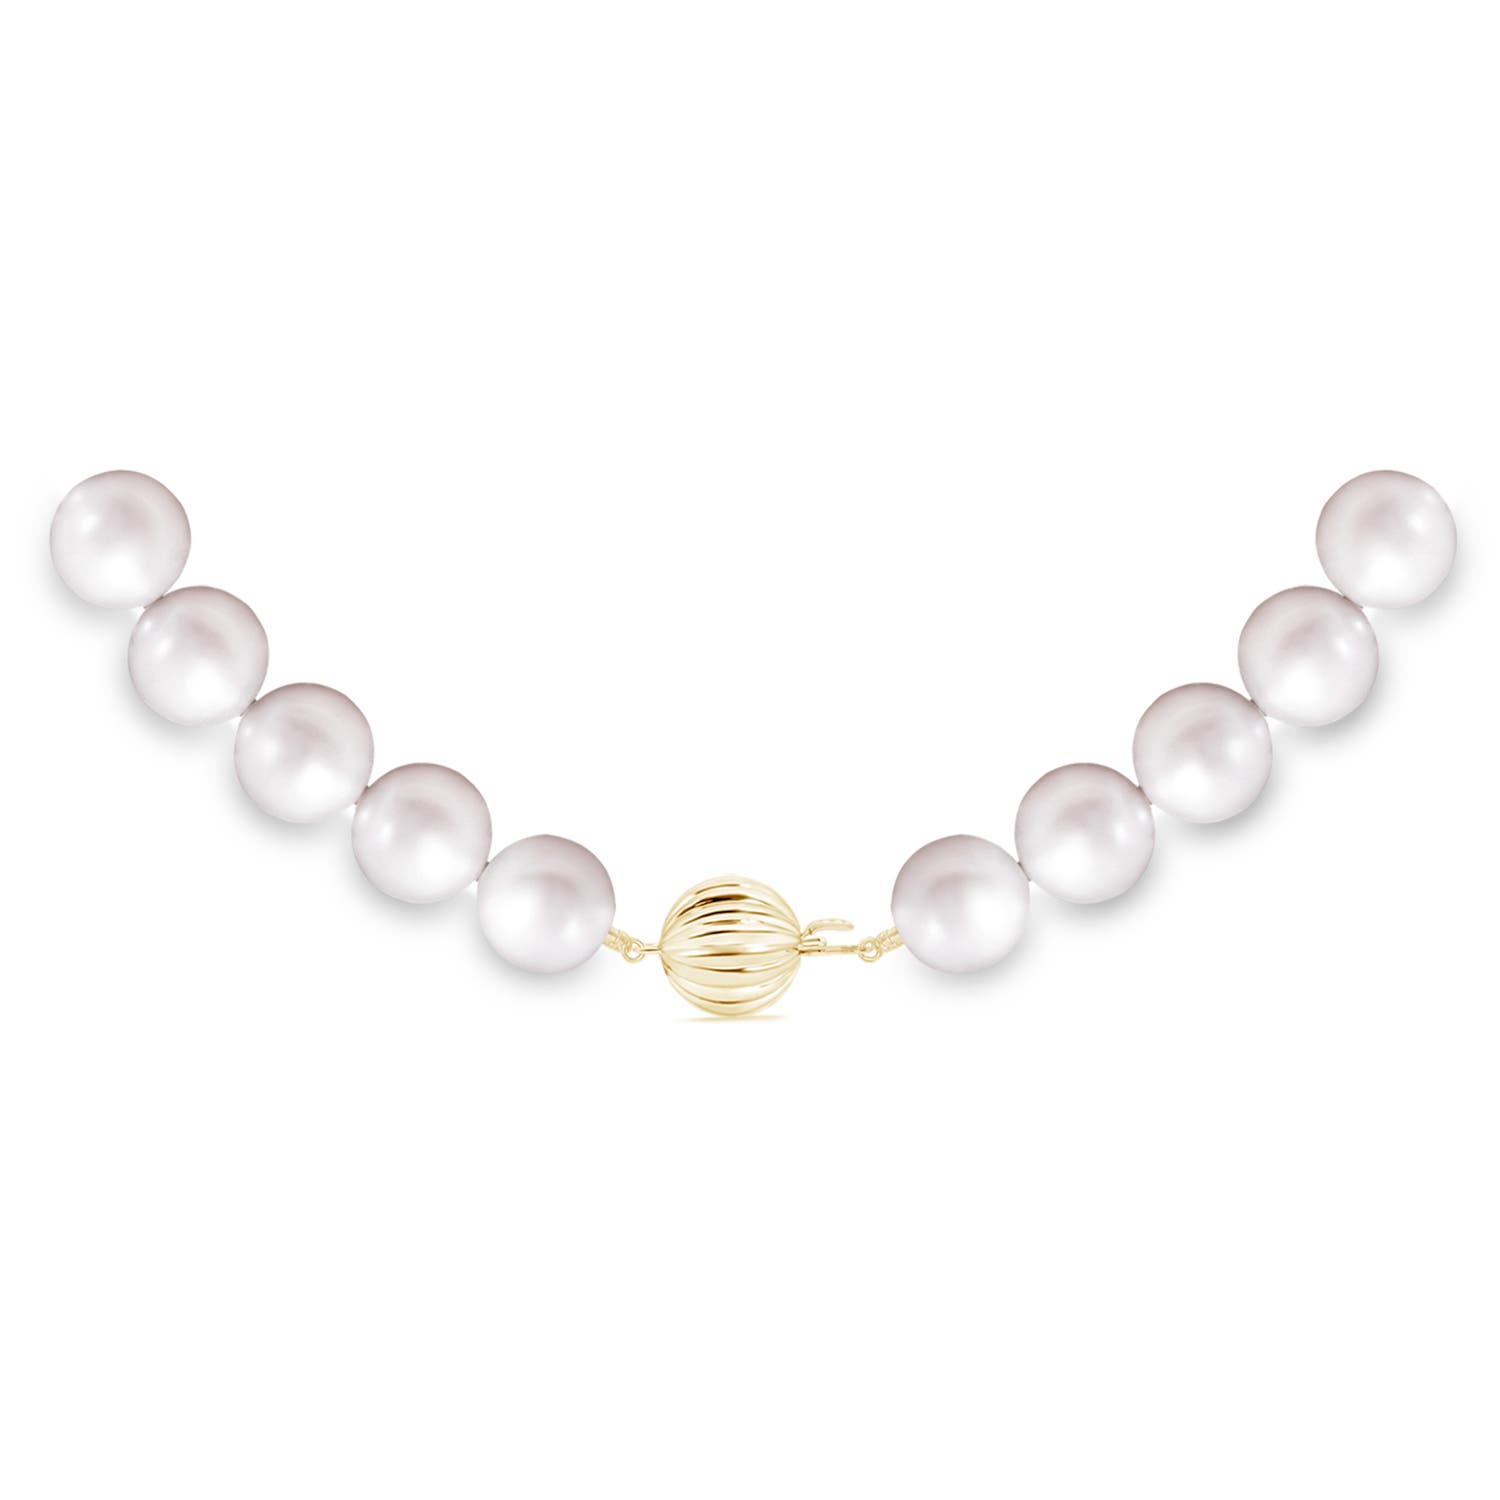 5.0-5.5mm Cultured Freshwater Pearl Strand Necklace with Sterling Silver  Filigree Clasp - 16